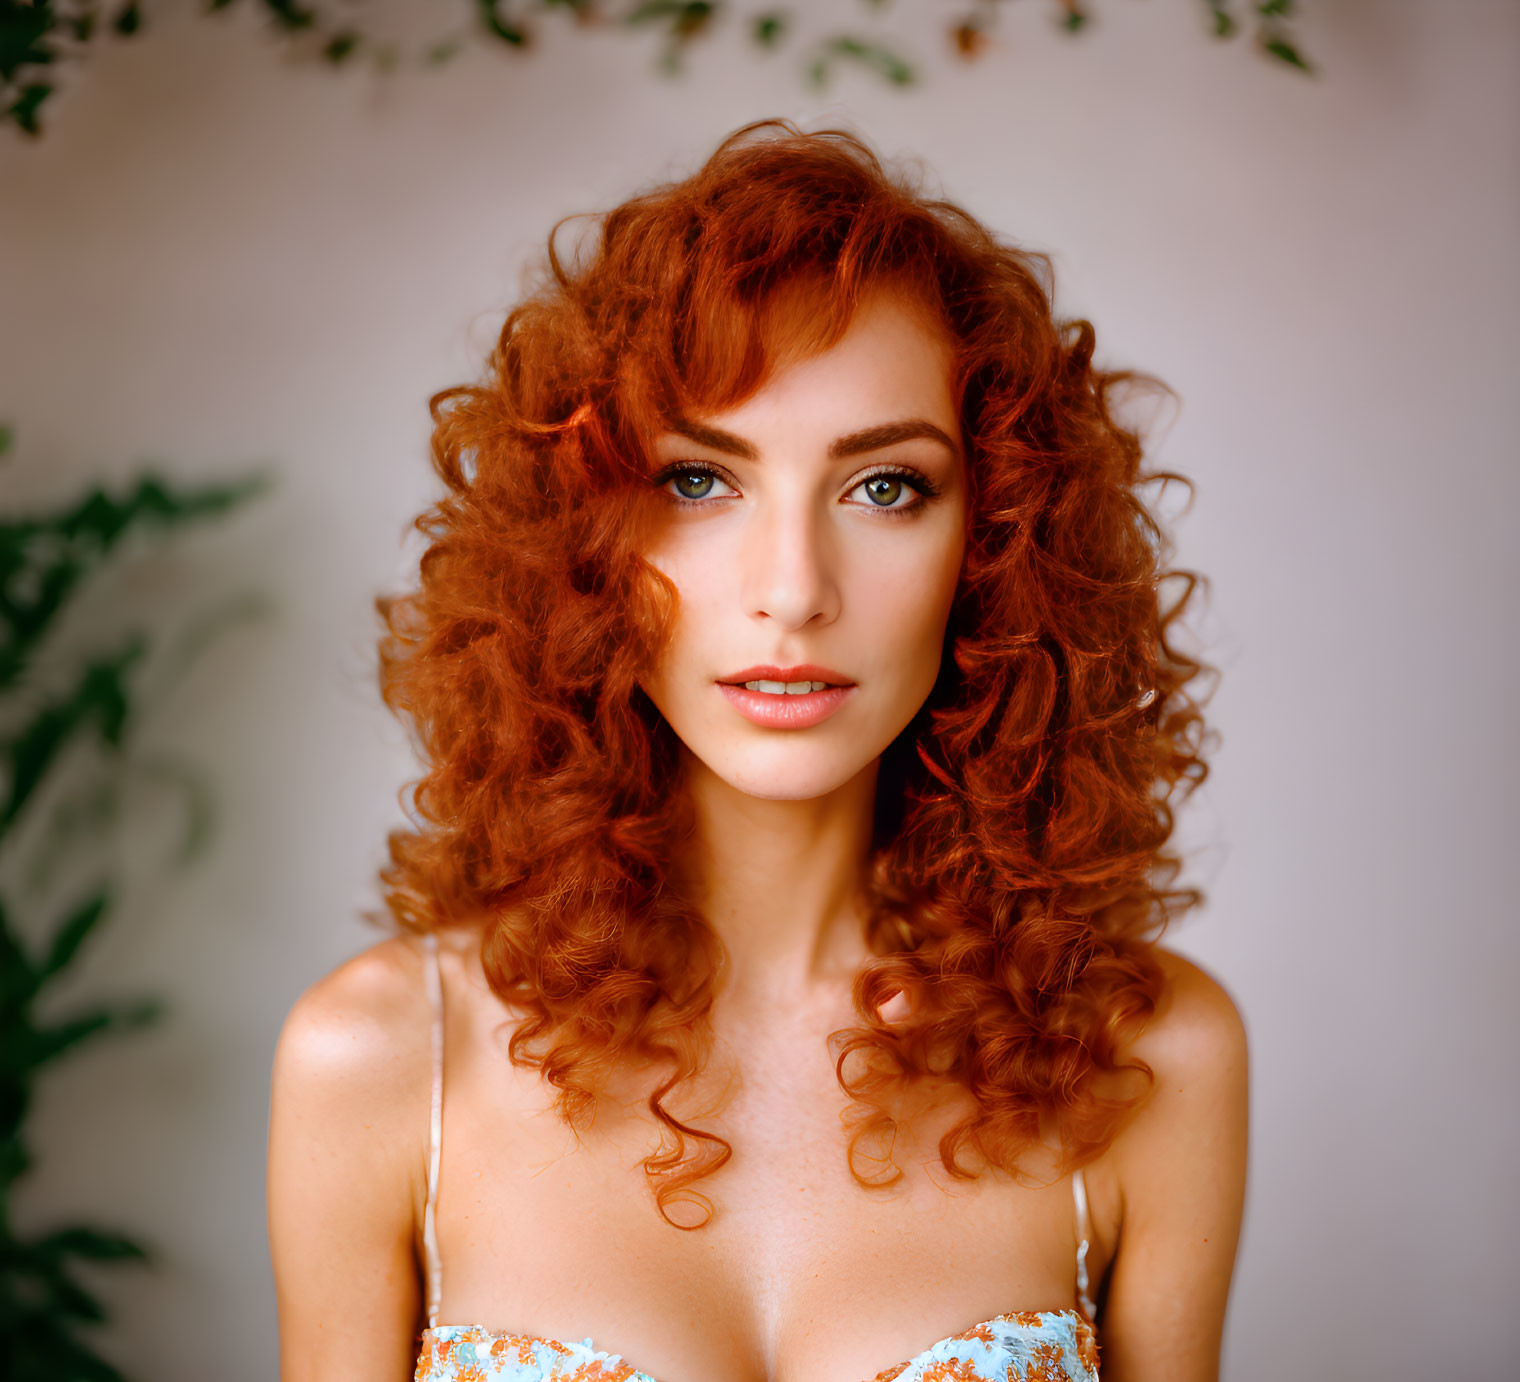 Curly Red-Haired Woman with Blue Eyes in Nature Setting